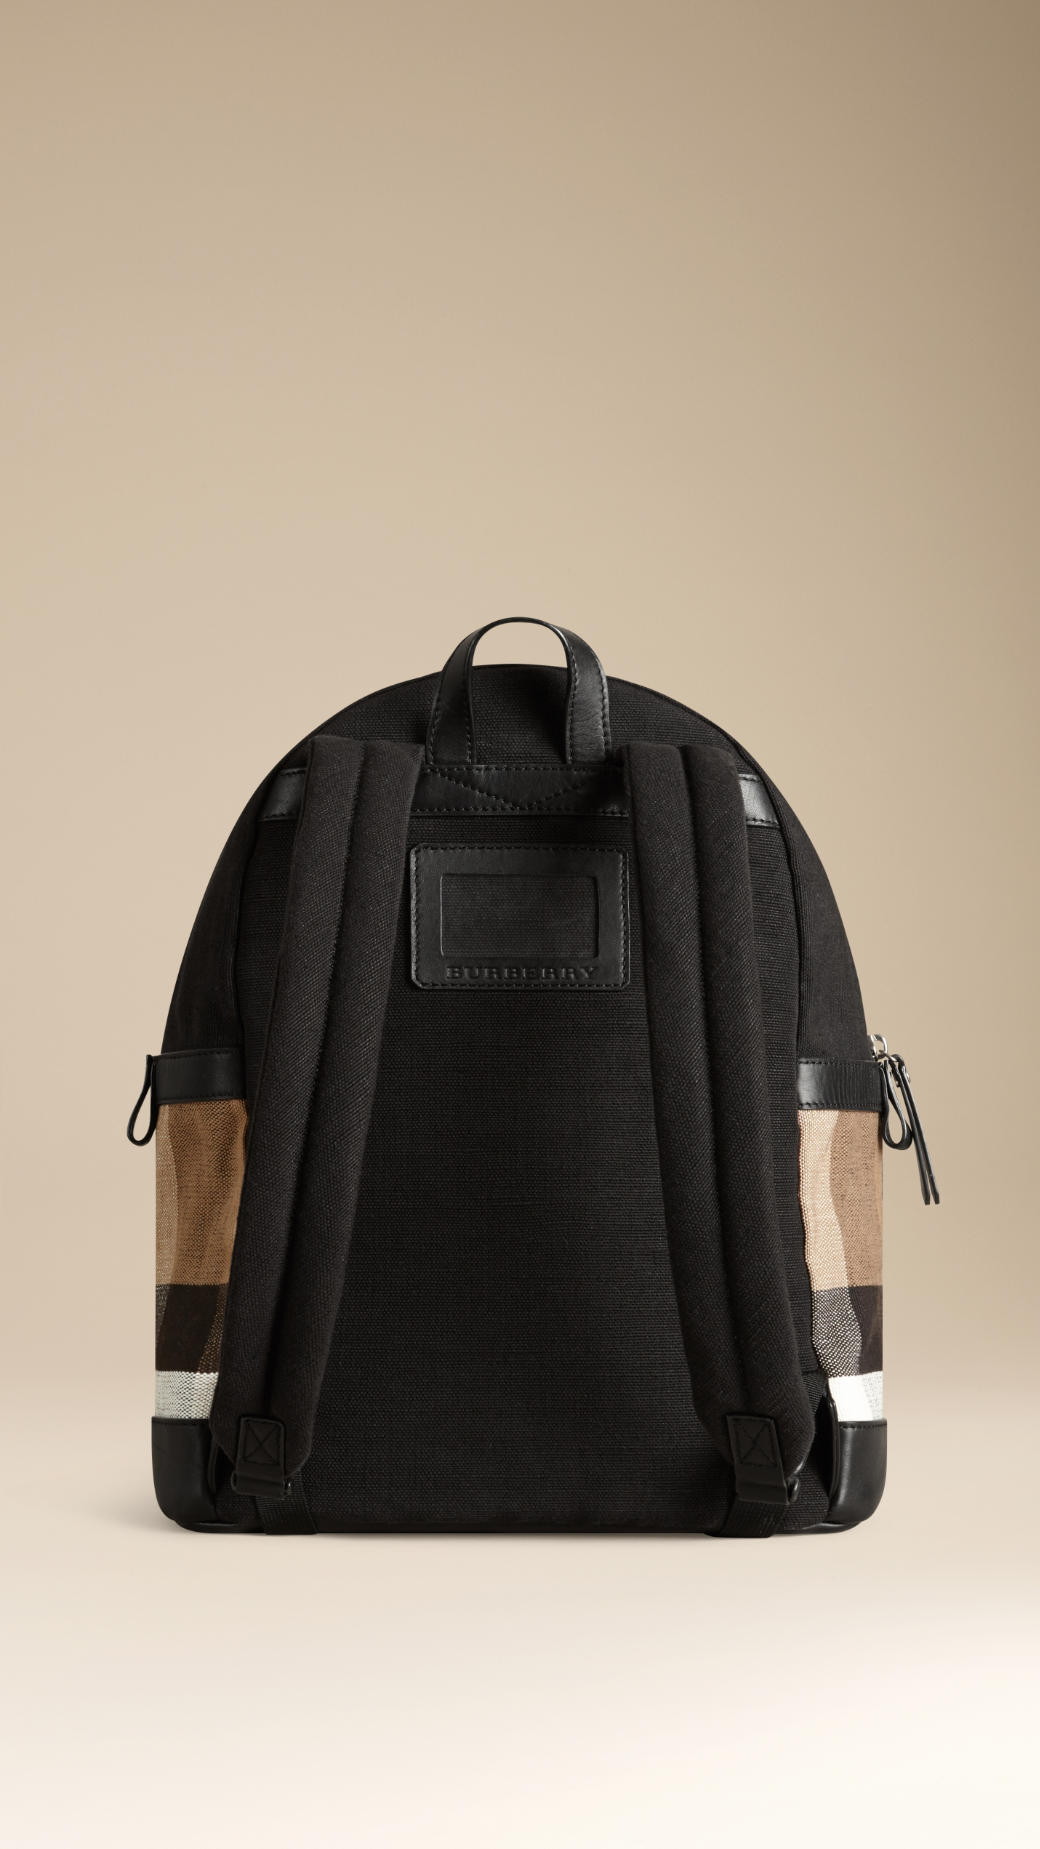 Lyst - Burberry Canvas Check And Leather Backpack in Black for Men